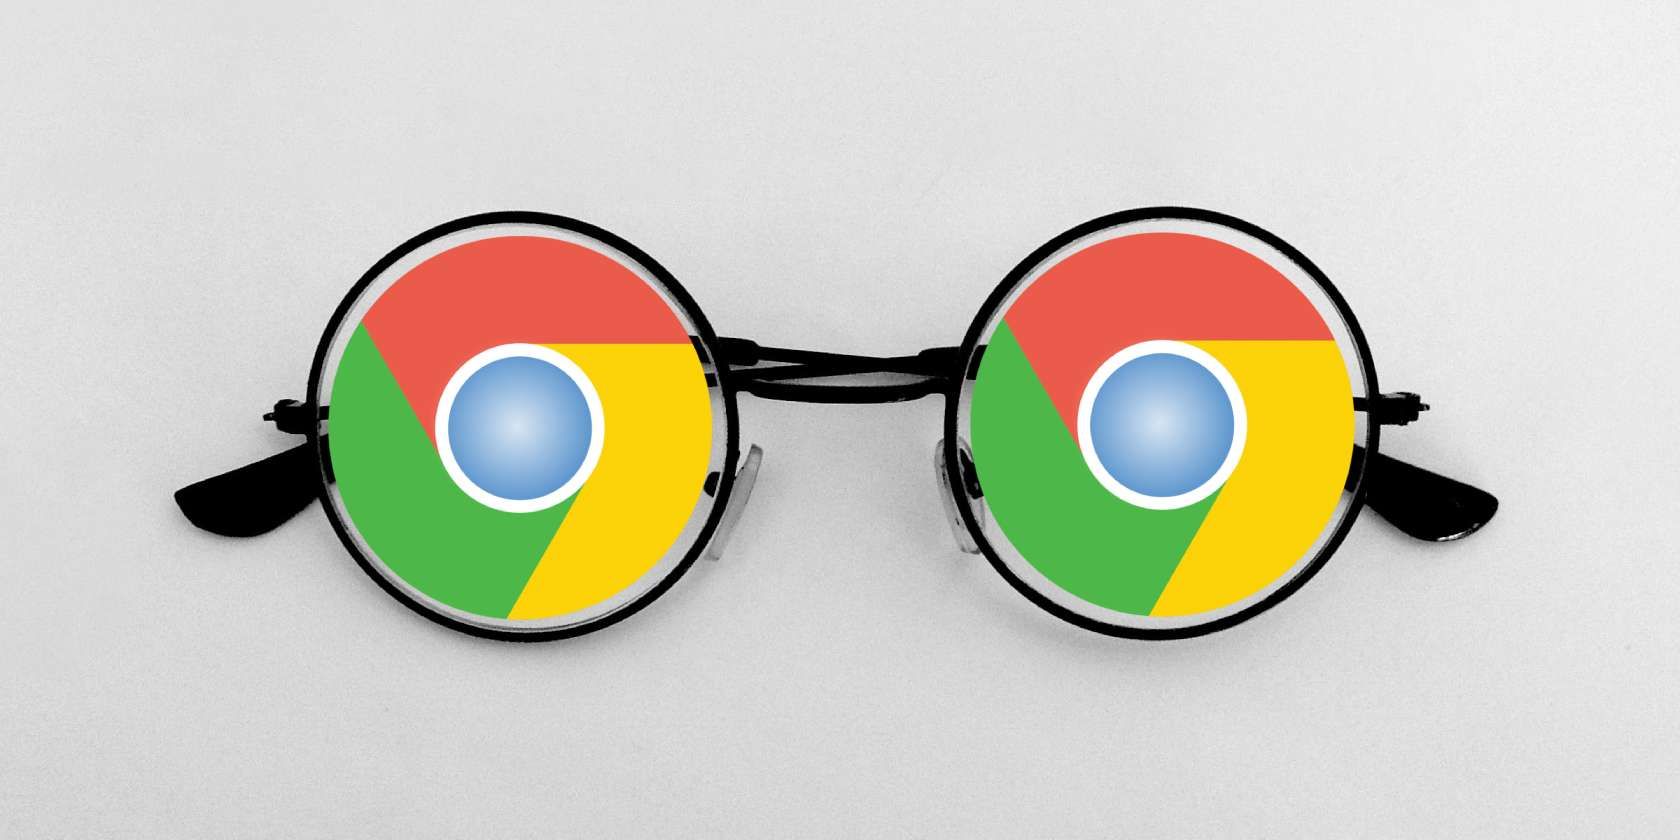 7 Chrome Extensions to Make Reading Online Articles Better